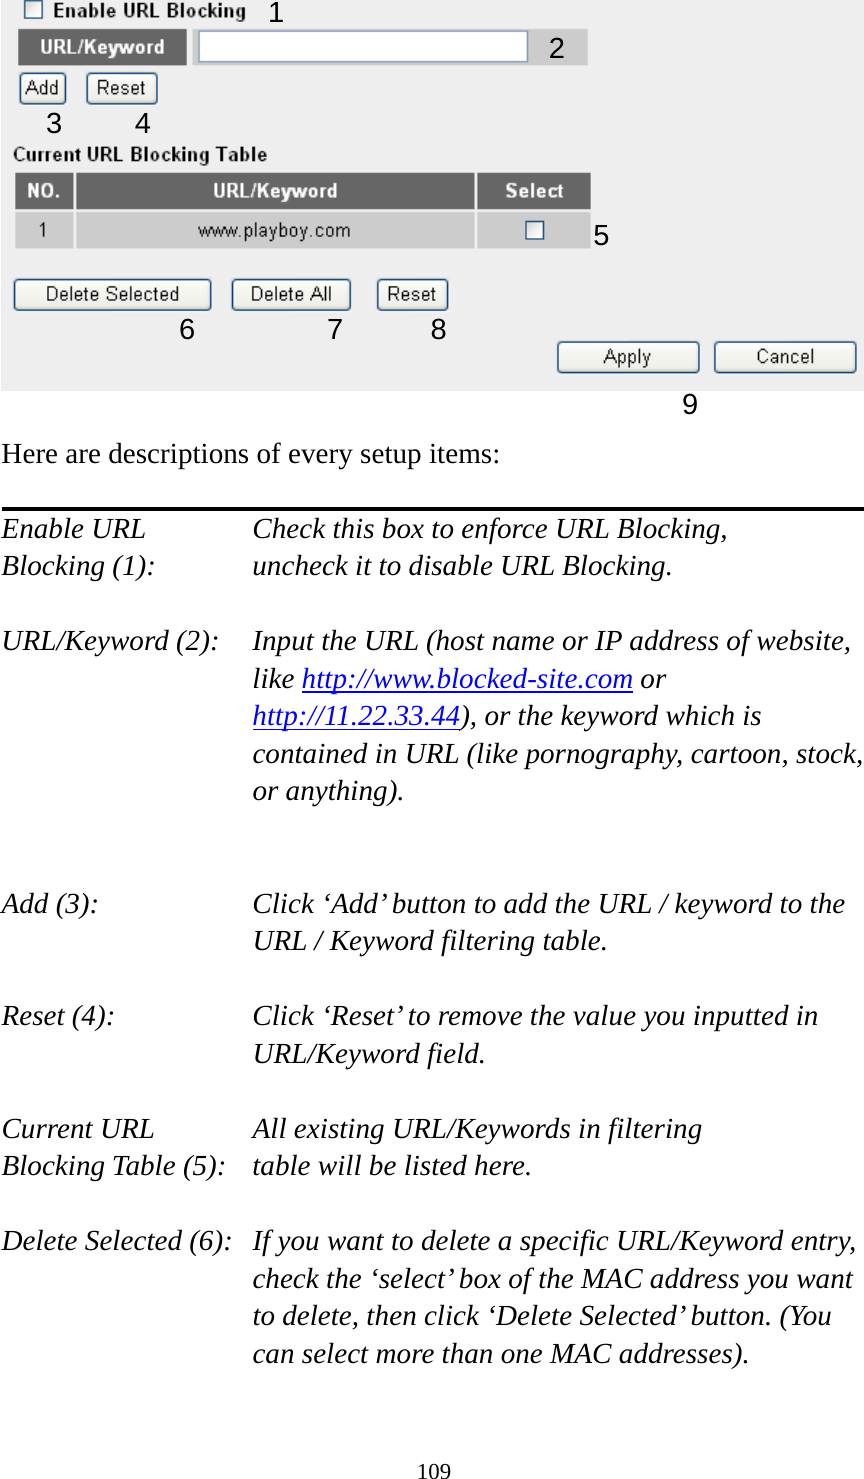 109   Here are descriptions of every setup items:  Enable URL      Check this box to enforce URL Blocking, Blocking (1):      uncheck it to disable URL Blocking.  URL/Keyword (2):    Input the URL (host name or IP address of website, like http://www.blocked-site.com or http://11.22.33.44), or the keyword which is contained in URL (like pornography, cartoon, stock, or anything).   Add (3):    Click ‘Add’ button to add the URL / keyword to the URL / Keyword filtering table.  Reset (4):    Click ‘Reset’ to remove the value you inputted in URL/Keyword field.  Current URL      All existing URL/Keywords in filtering Blocking Table (5):   table will be listed here.  Delete Selected (6):   If you want to delete a specific URL/Keyword entry, check the ‘select’ box of the MAC address you want to delete, then click ‘Delete Selected’ button. (You can select more than one MAC addresses).  2 3 4 5 6 7 8 9 1 